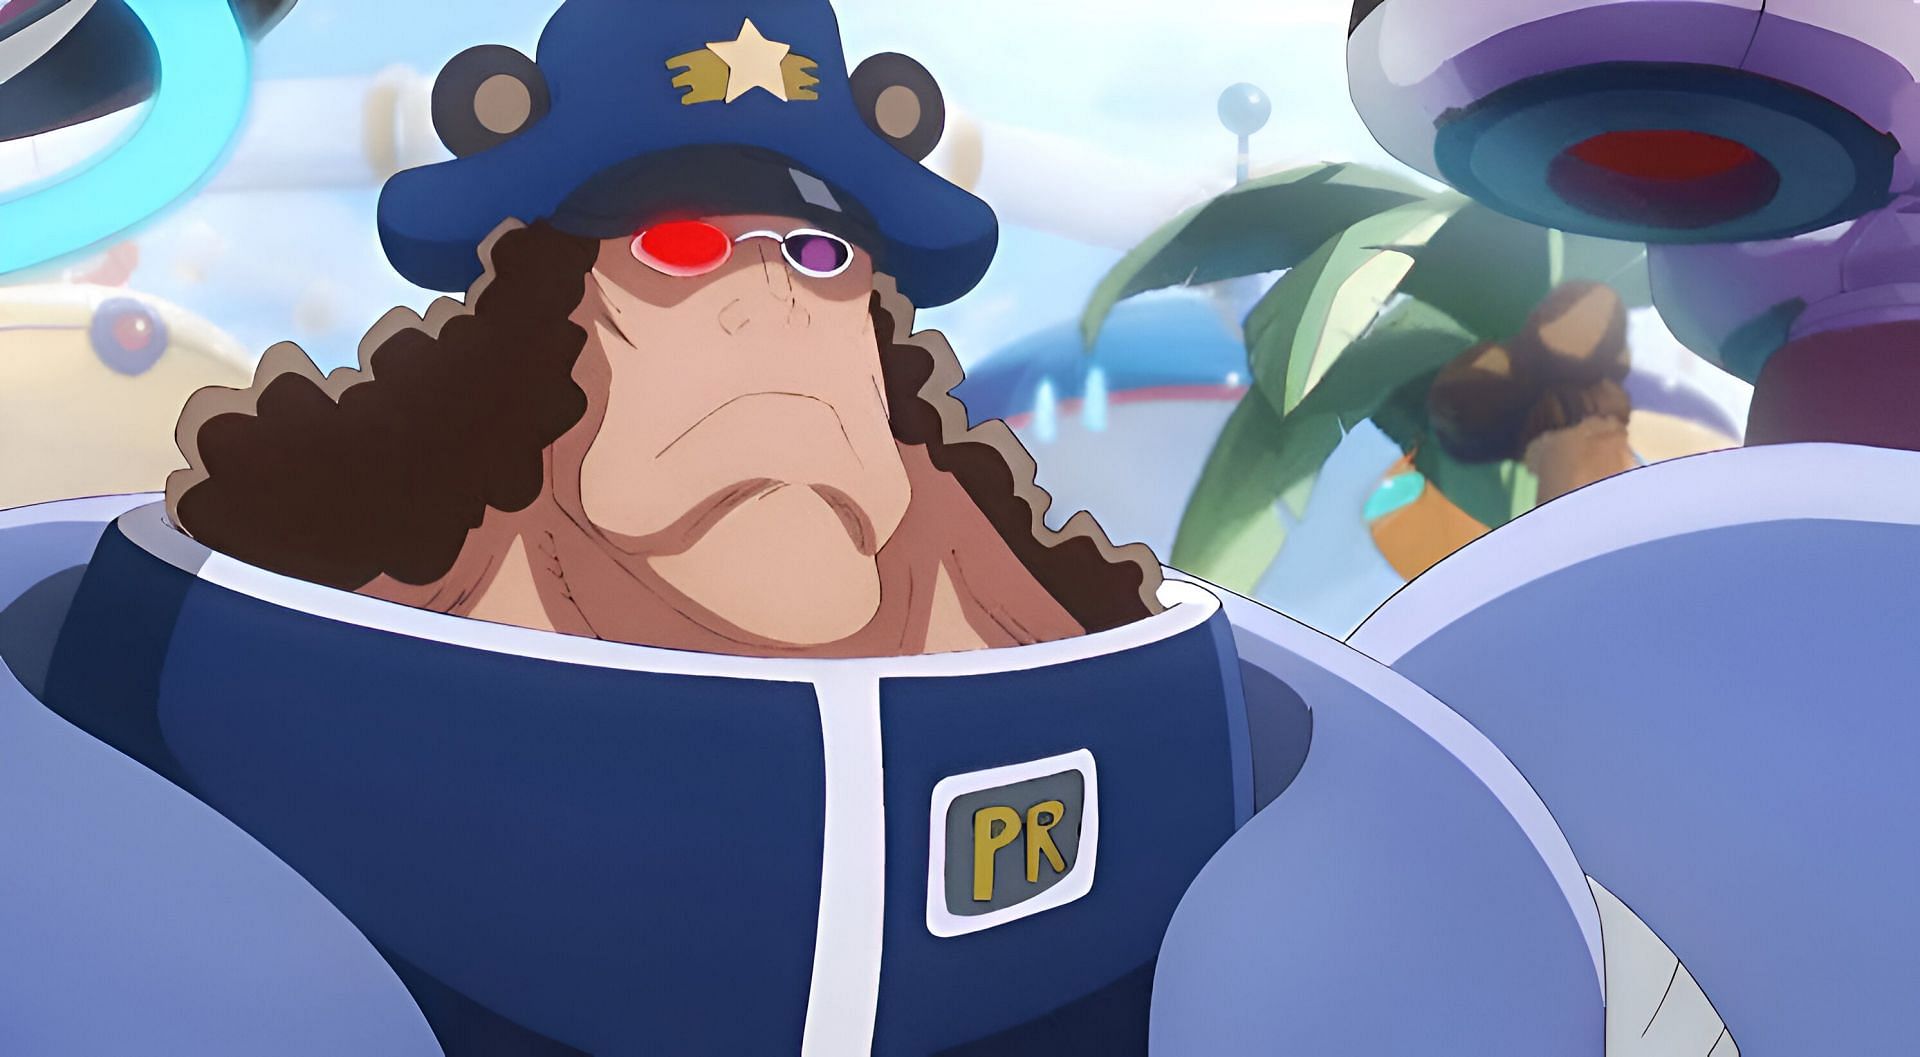 The Pacifista as seen in the anime (Image via Toei Animation)